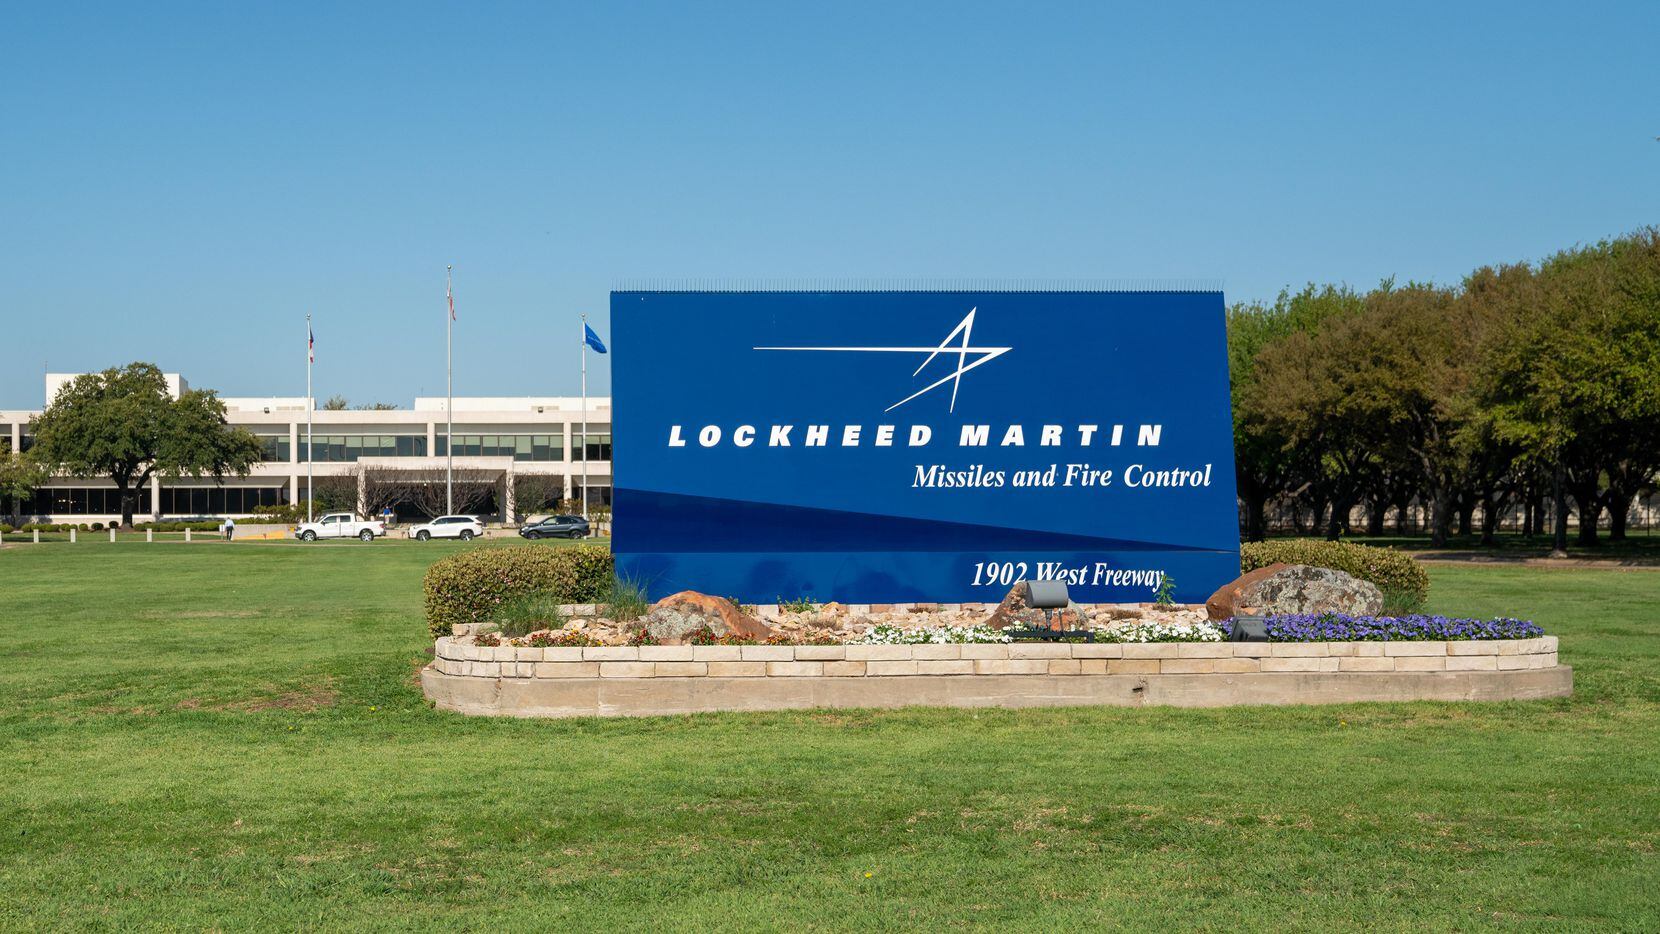 Lockheed Martin Missiles and Fire Control's facility in Grand Prairie, Texas was one of the...